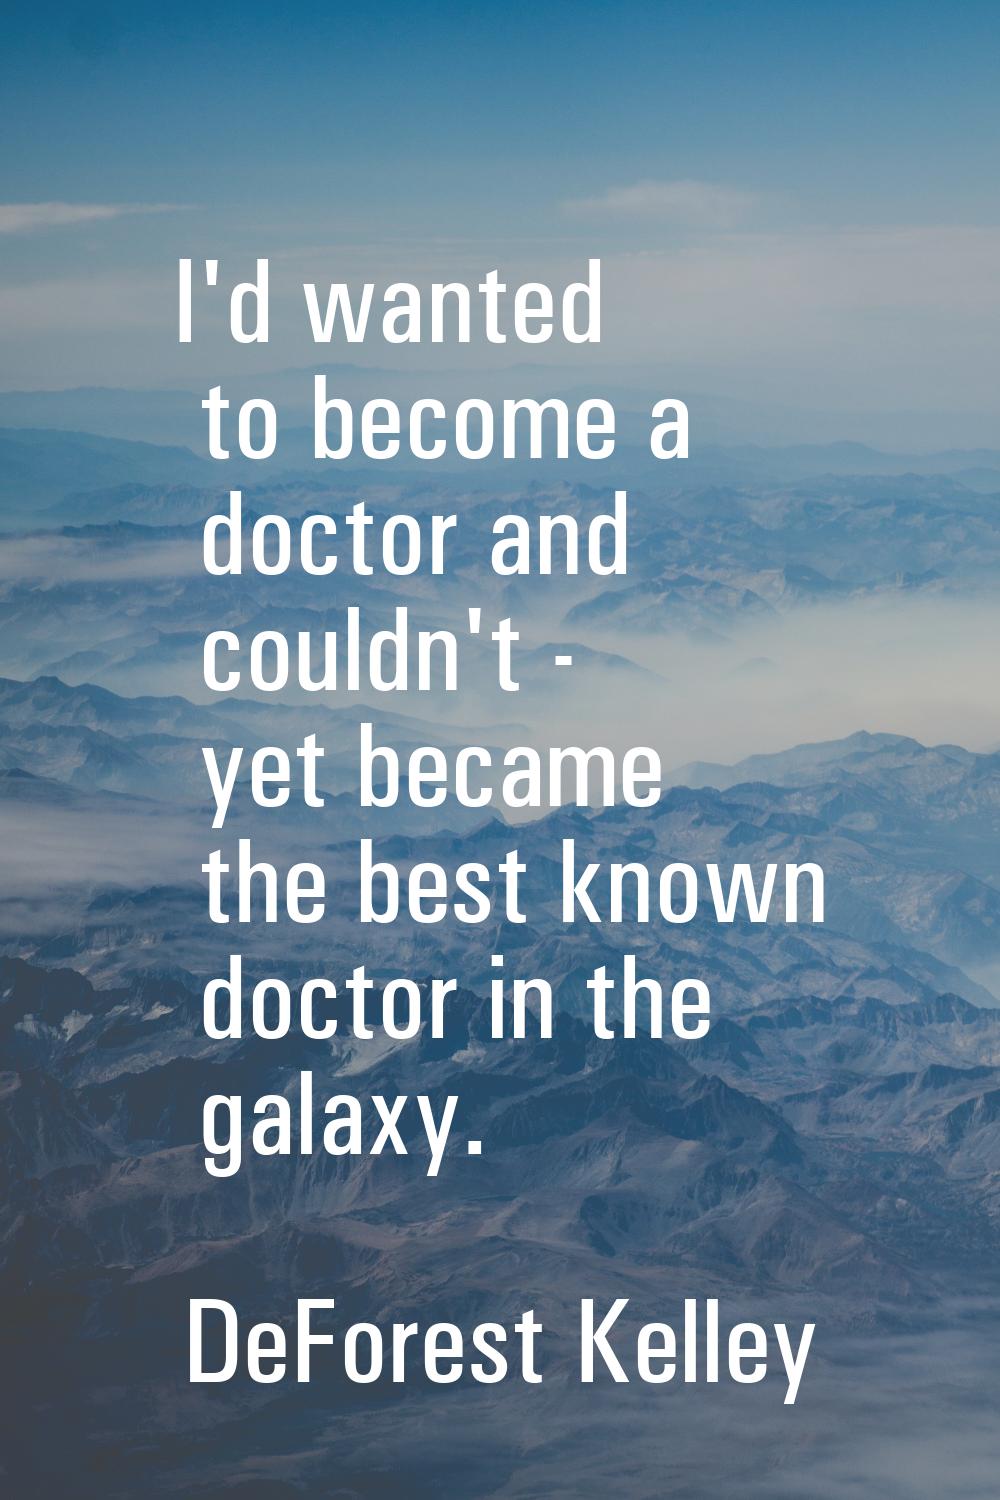 I'd wanted to become a doctor and couldn't - yet became the best known doctor in the galaxy.